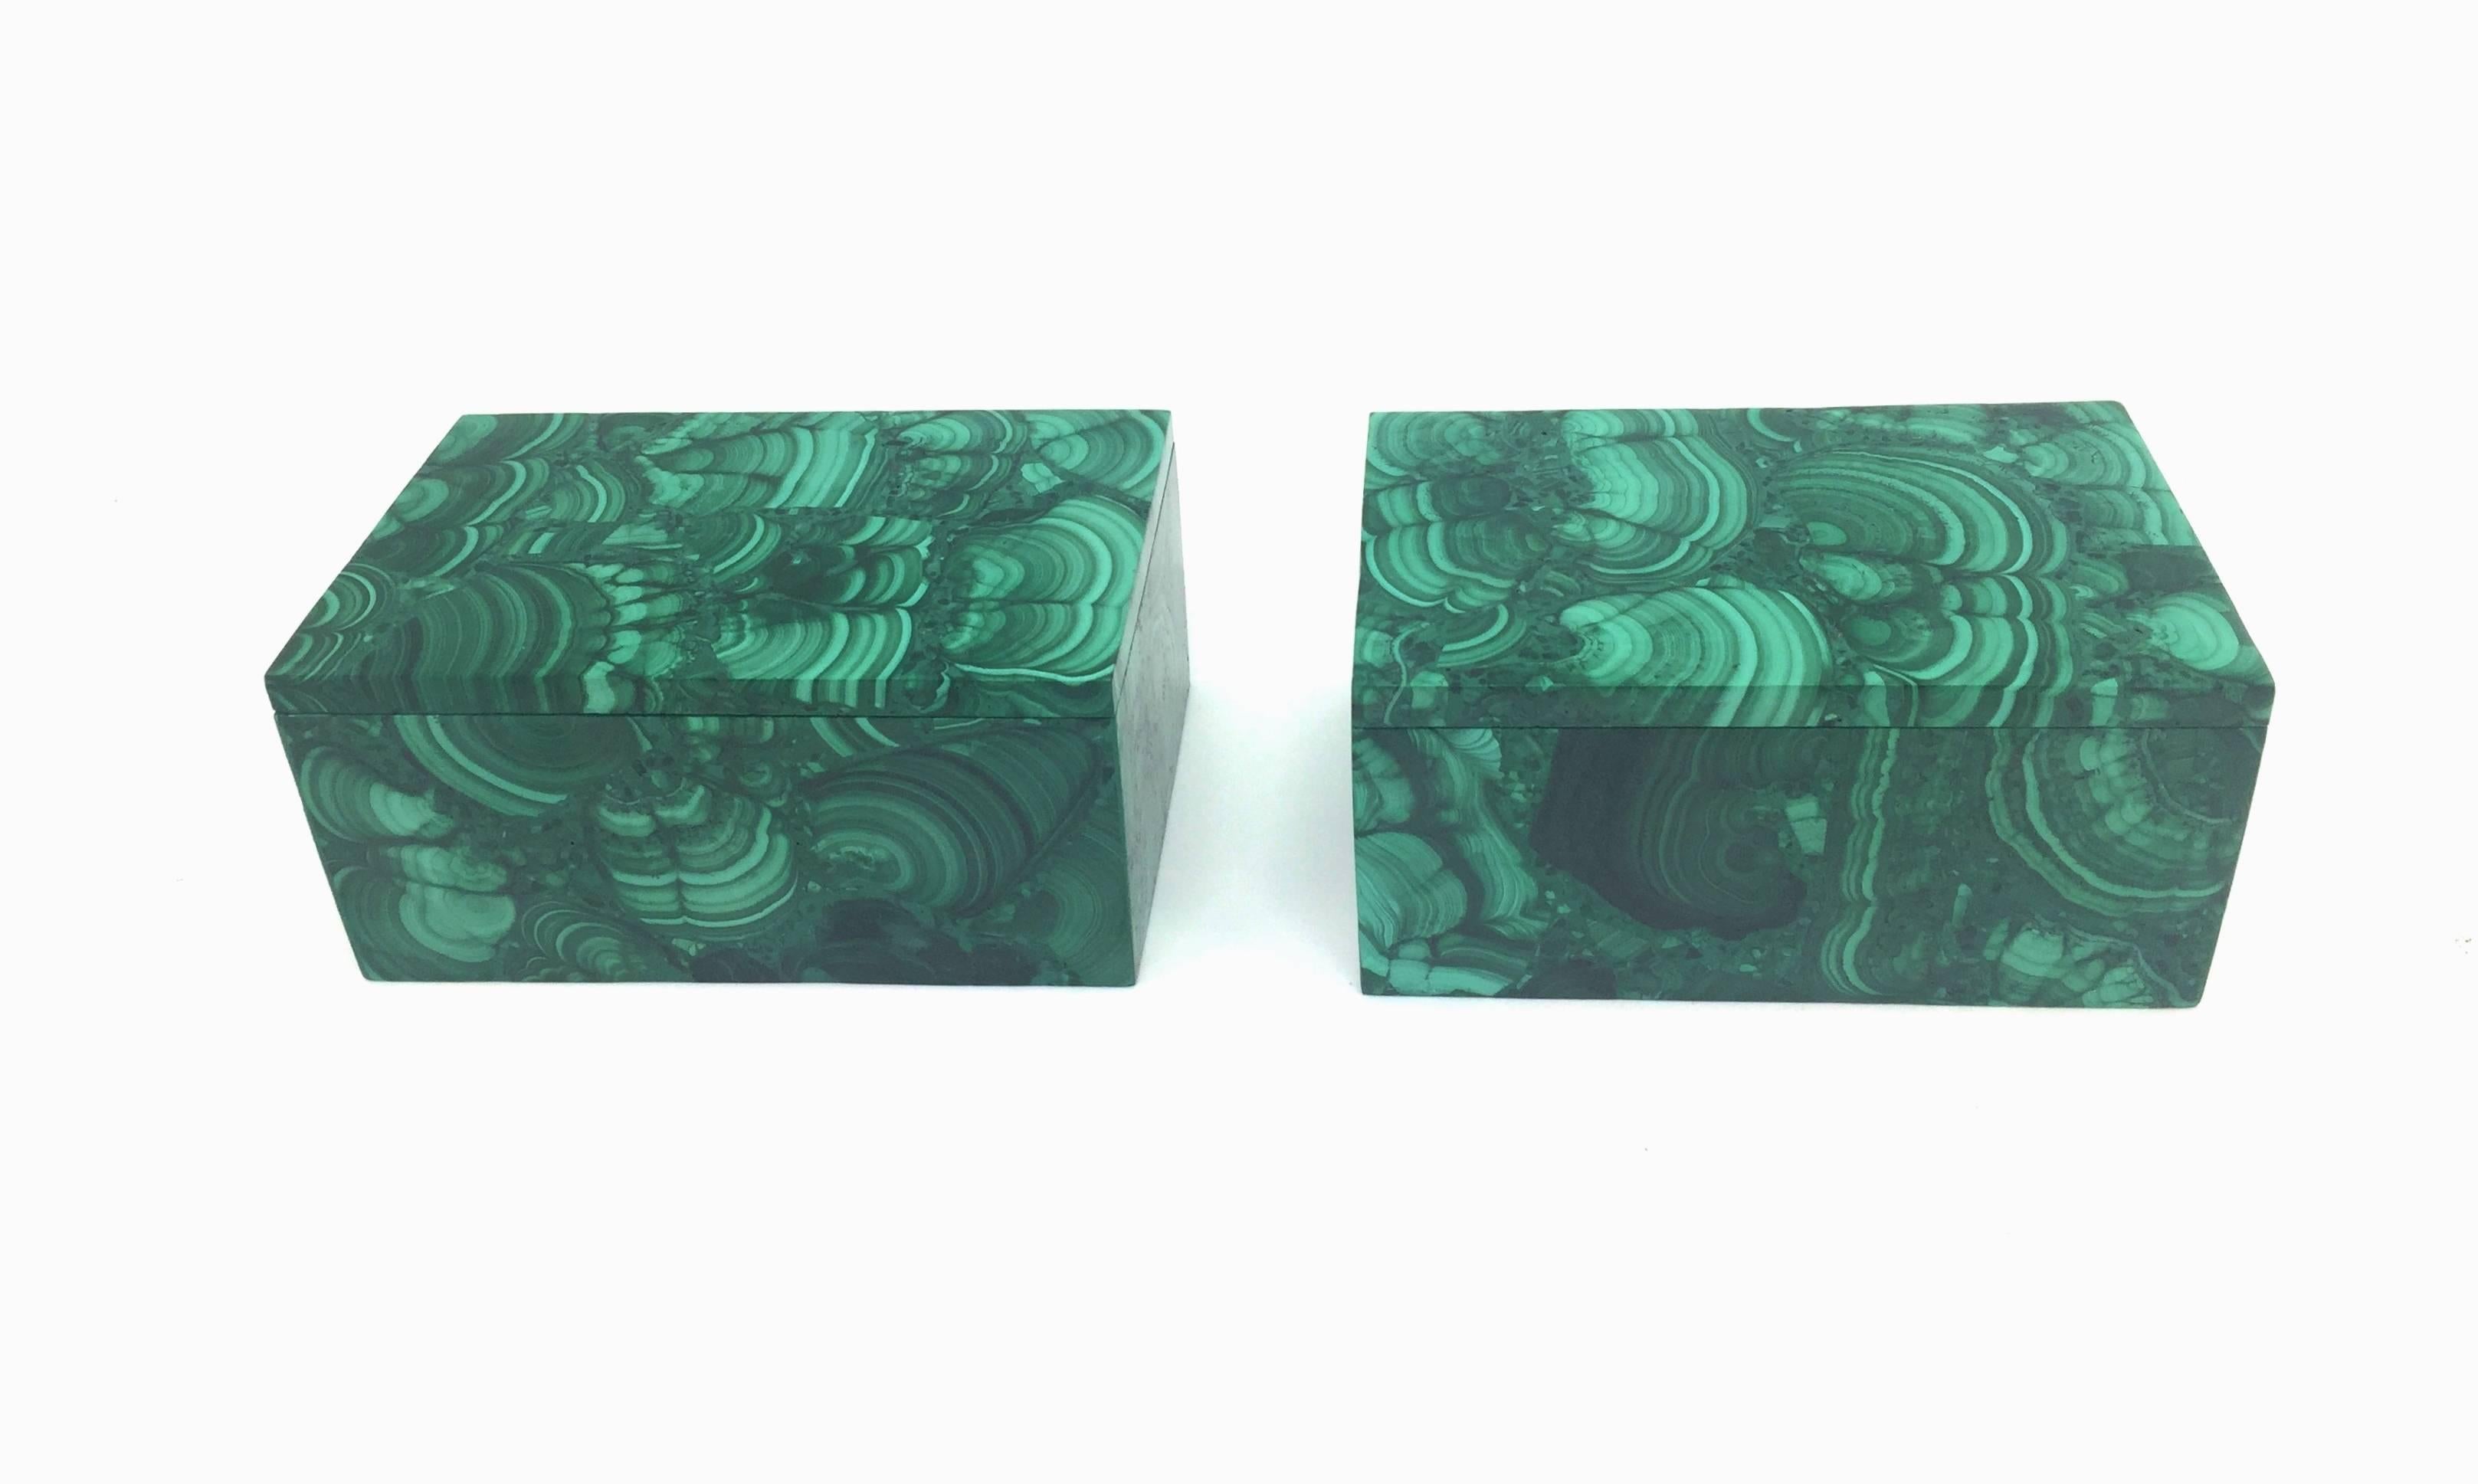 This pair of extraordinary box is made with the most beautiful malachite. All natural with splendid swirls and patterns, these remarkable pieces are sophisticated additions to your home.

Malachite is a stone of transformation, helping one achieve